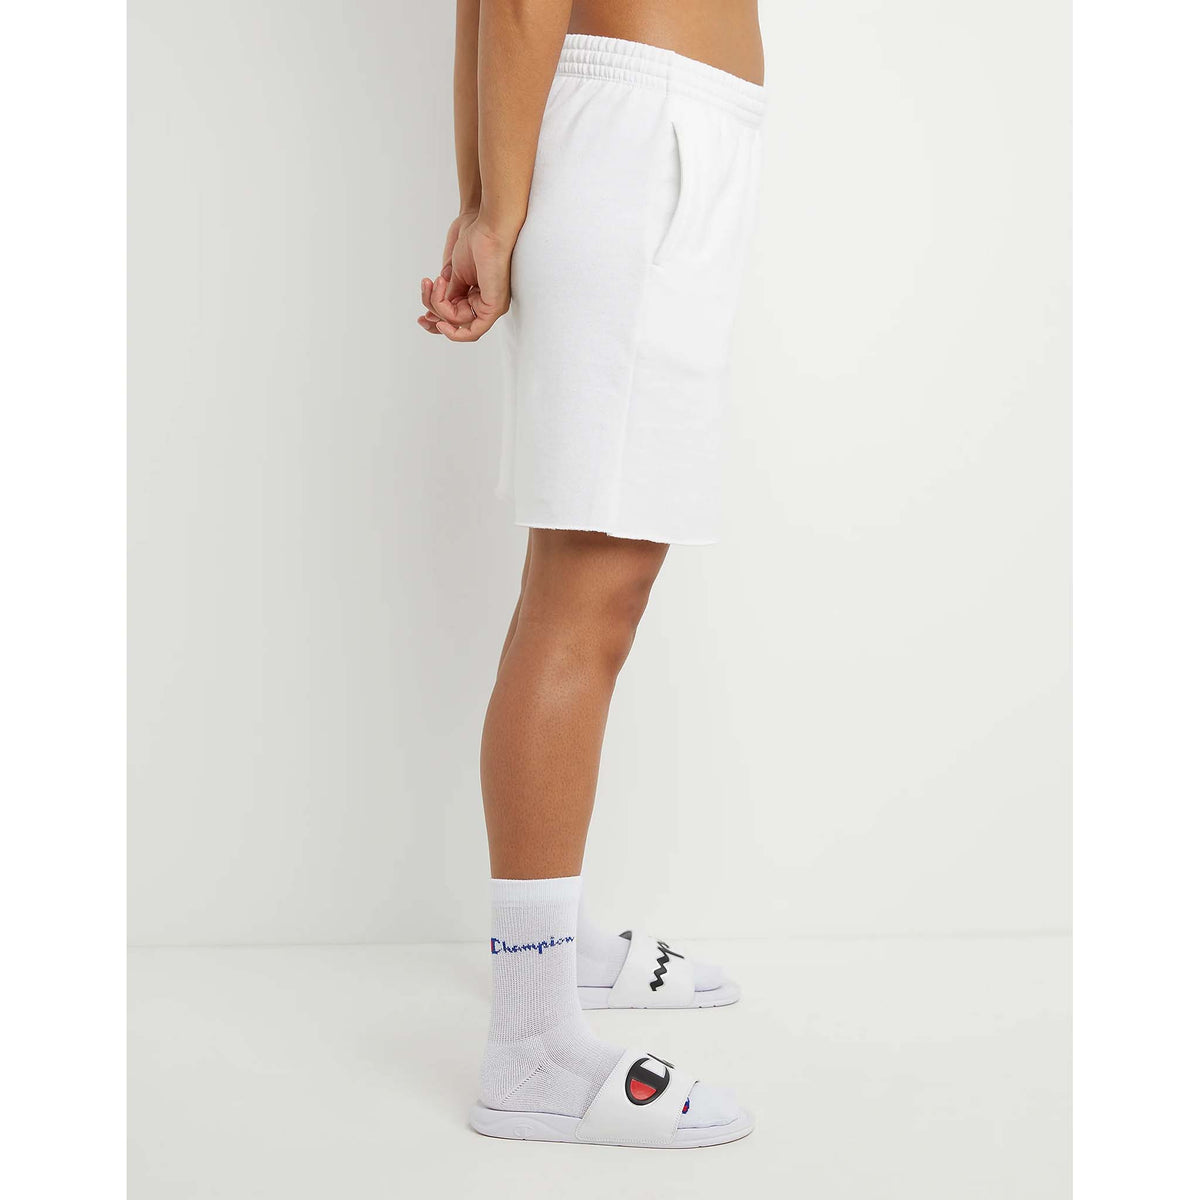 Champion Powerblend 6.5 Inch shorts blanc femme lateral droit